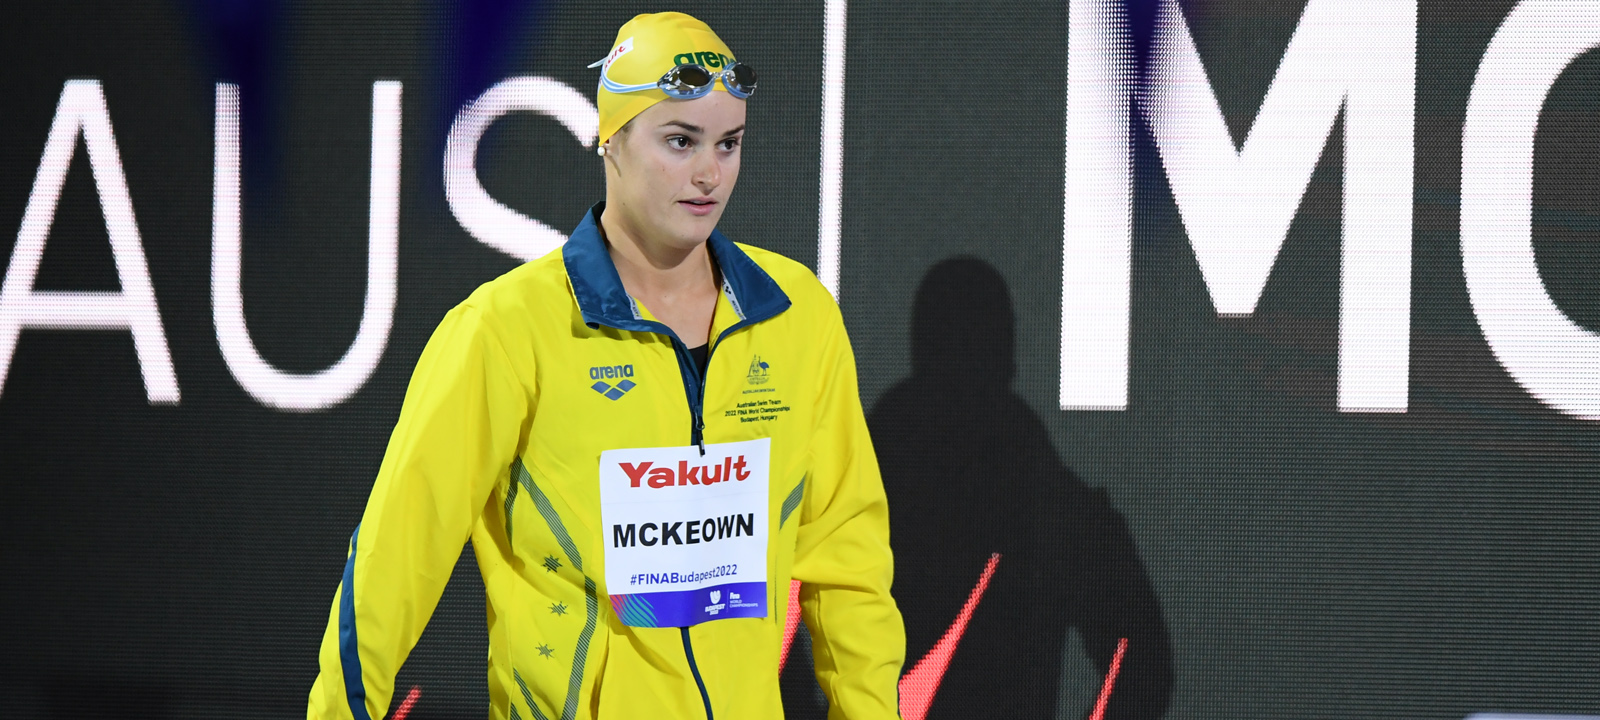 World Record Holder McKeown Scorches 2:04.18 200 Back As 5th Fastest Performance